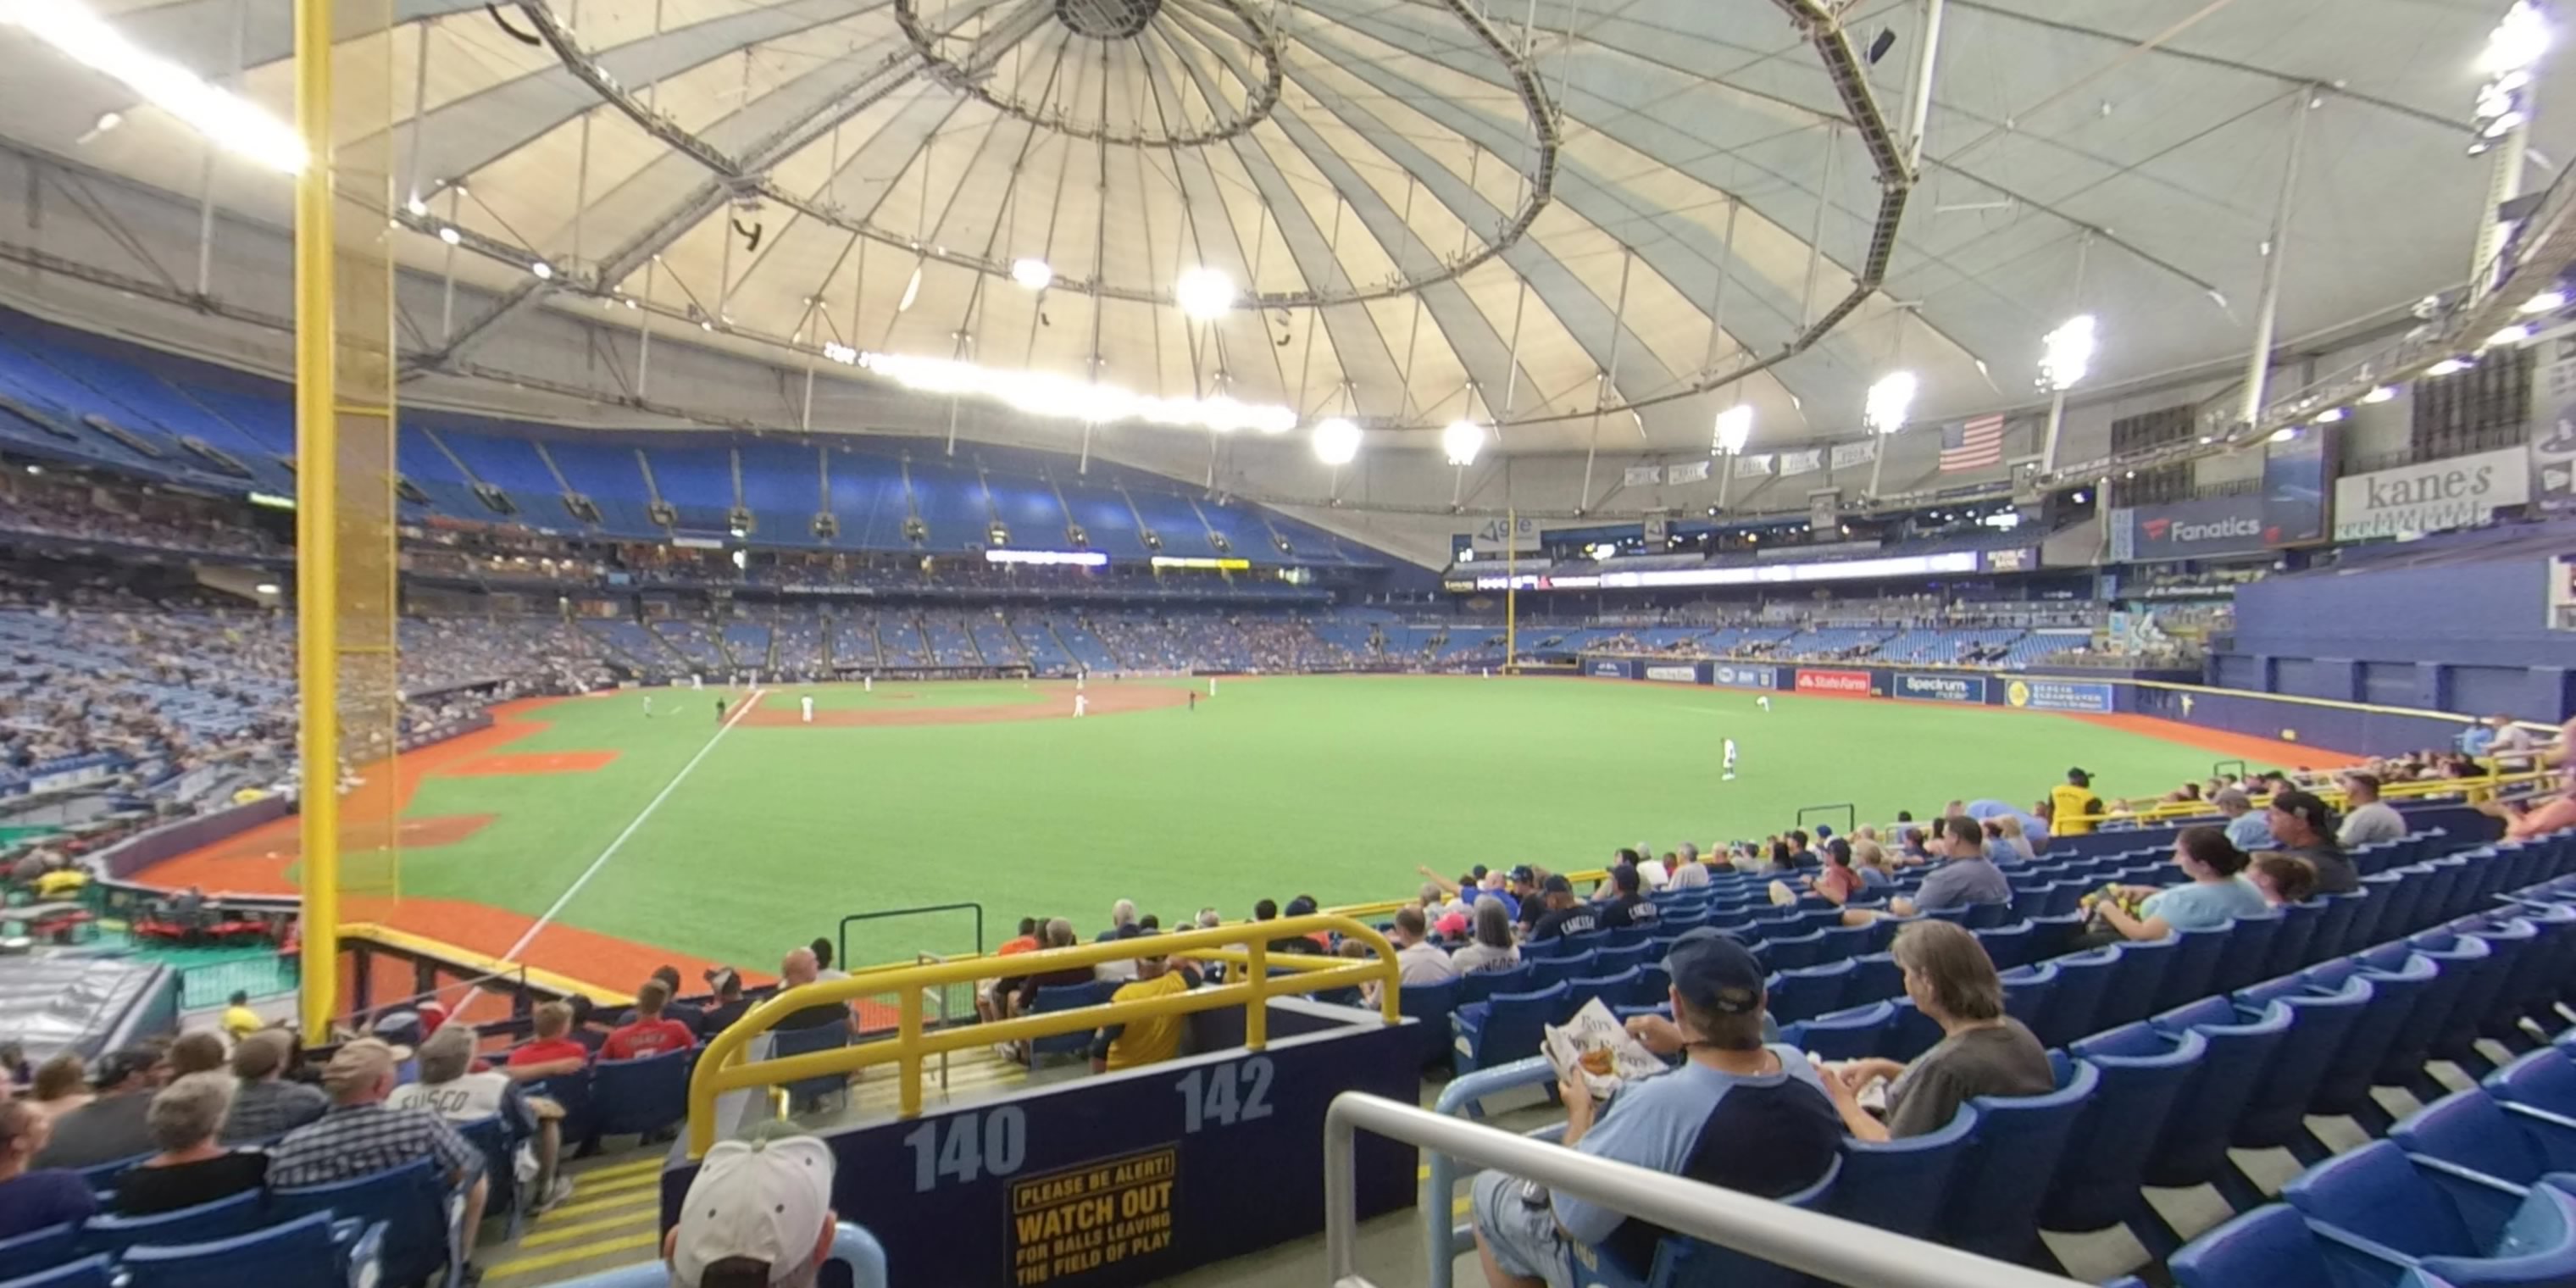 section 142 panoramic seat view  for baseball - tropicana field